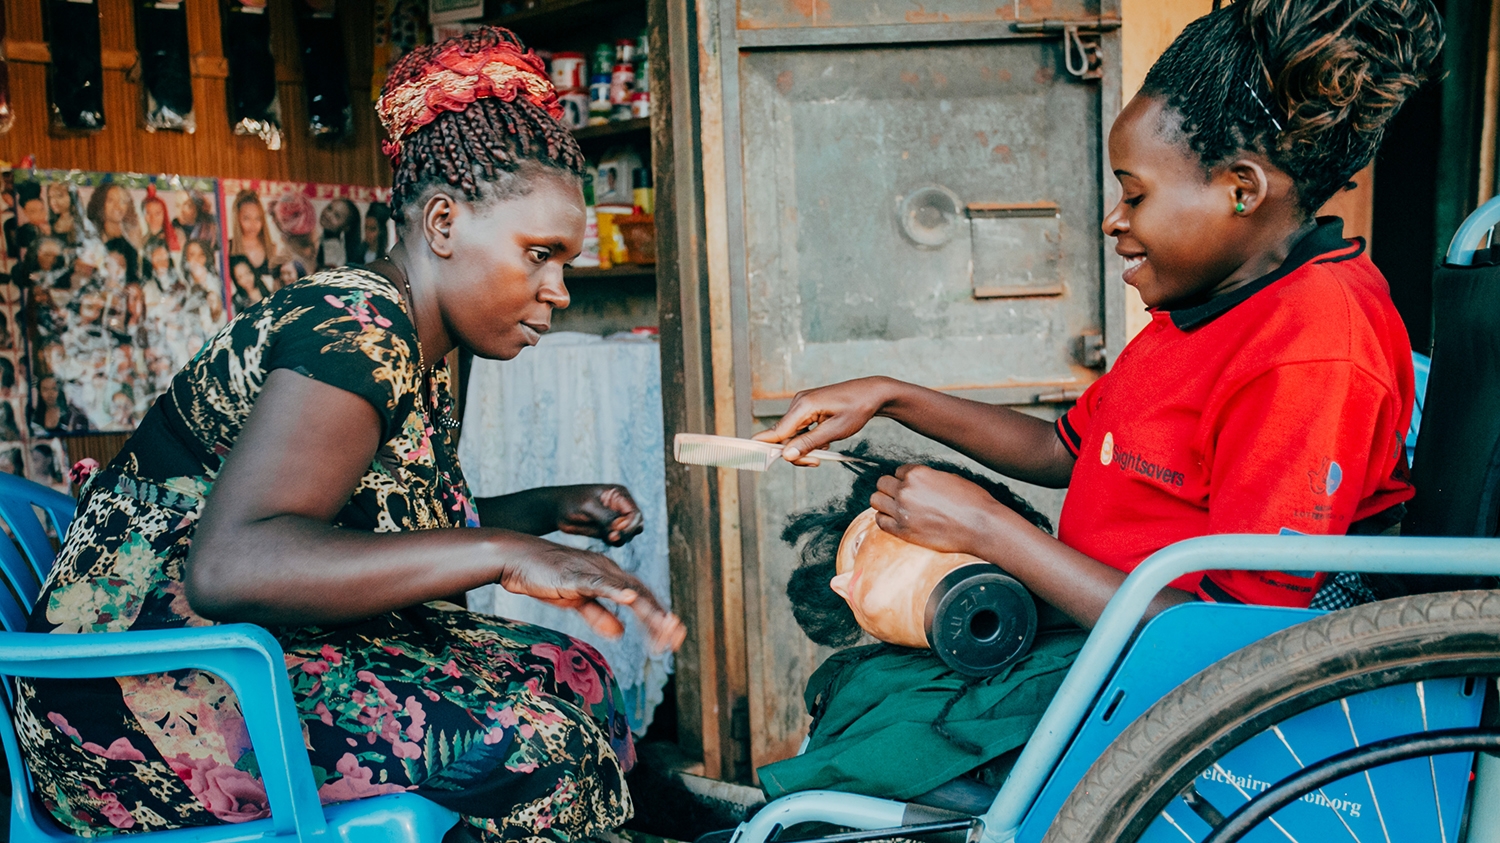 Beatrice trains intern Irene, who uses a wheelchair, at a hair salon in Uganda.